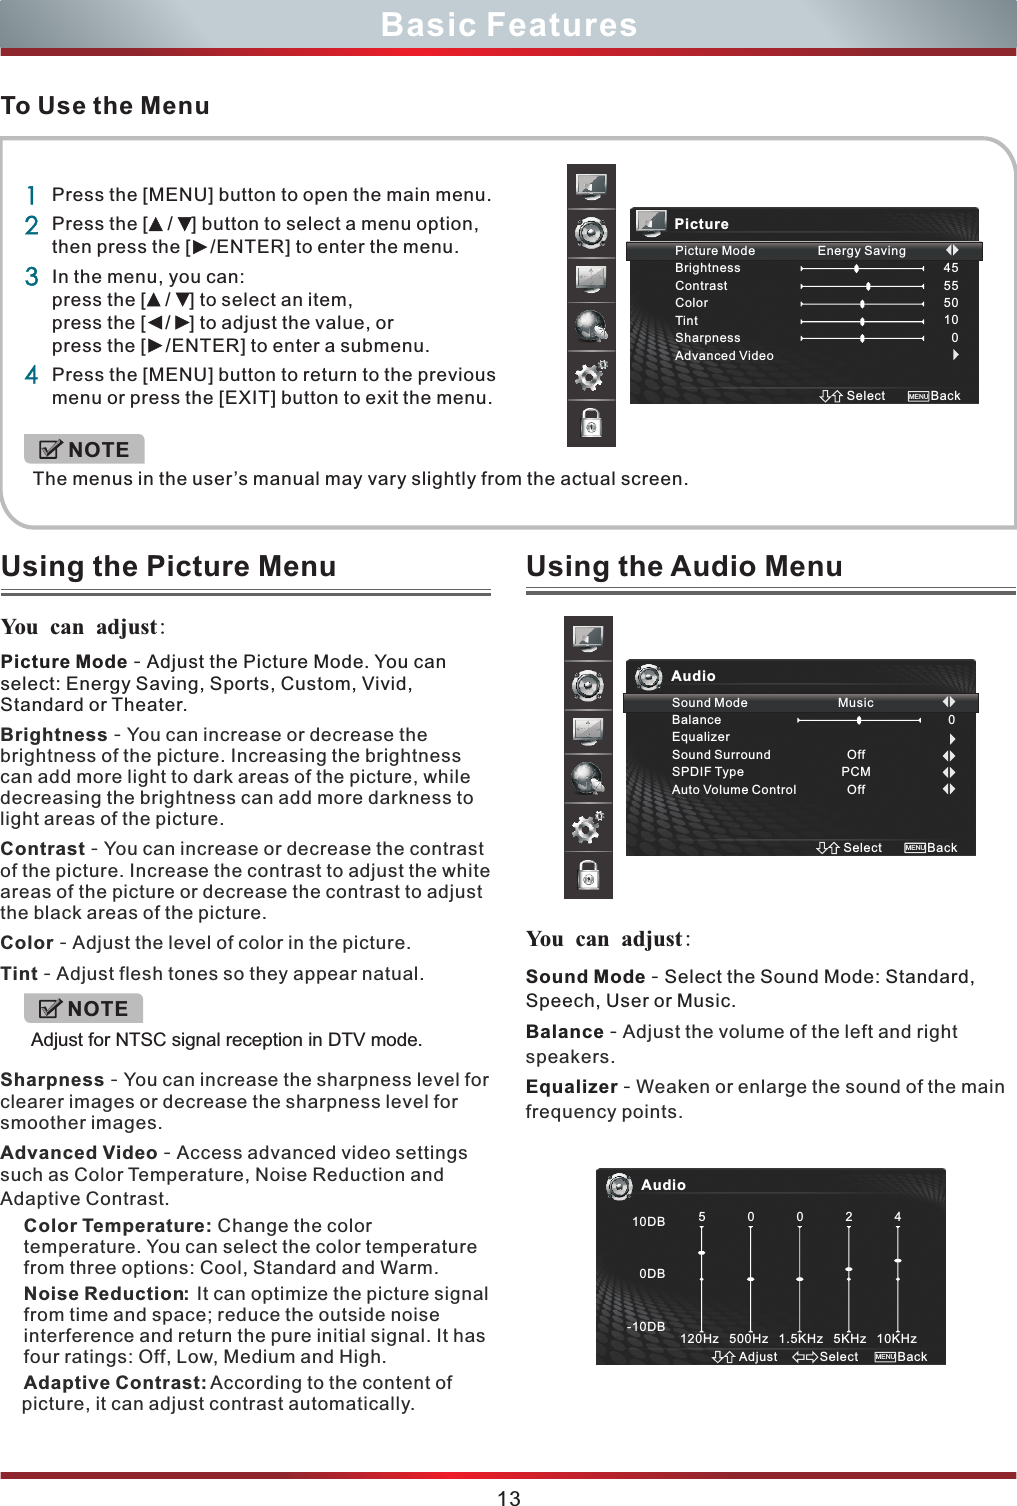 To Use the MenuUsing the Picture Menu You can adjust:  13Basic FeaturesPicture Mode - Adjust the Picture Mode. You can select: Energy Saving, Sports, Custom, Vivid, Standard or Theater.Brightness - You can increase or decrease the brightness of the picture. Increasing the brightness can add more light to dark areas of the picture, while decreasing the brightness can add more darkness to light areas of the picture.Contrast - You can increase or decrease the contrast of the picture. Increase the contrast to adjust the white areas of the picture or decrease the contrast to adjust the black areas of the picture. Color - Adjust the level of color in the picture.Tint - Adjust flesh tones so they appear natual.Sharpness - You can increase the sharpness level for clearer images or decrease the sharpness level for smoother images.Advanced Video - Access advanced video settings such as Color Temperature, Noise Reduction and Adaptive Contrast.Color Temperature: Change the color temperature. You can select the color temperature from three options: Cool, Standard and Warm.Noise Reduction:  It can optimize the picture signal from time and space; reduce the outside noise interference and return the pure initial signal. It has four ratings: Off, Low, Medium and High.Adaptive Contrast: According to the content of picture, it can adjust contrast automatically.1234Press the [MENU] button to open the main menu.Press the   to select a menu option, then press the   to enter the menu.In the menu, you can: press the   to select an item, press the   to adjust the value, or press the [  /ENTER] to enter a submenu.Press the [MENU] button to return to the previous menu or press the [EXIT] button to exit the menu. [  /  ] button[  /ENTER][  /  ][  /  ]The menus in the user’s manual may vary slightly from the actual screen.NOTEPicturePicture Mode                  Energy SavingBrightnessContrastColorTintSharpnessAdvanced Video455550100Select BackMENUSound Mode - Select the Sound Mode: Standard, Speech, User or Music.Balance - Equalizer - Adjust the volume of the left and right speakers.Weaken or enlarge the sound of the main  frequency points.Using the Audio Menu You can adjust: AudioSound Mode                          MusicBalanceEqualizerSound SurroundSPDIF TypeAuto Volume ControlOffPCMOff0Select BackMENUAudio10DB0DB-10DB5            0            0            2            4120Hz   500Hz   1.5KHz   5KHz   10KHzSelectAdjust BackMENUNOTEAdjust for NTSC signal reception in DTV mode.